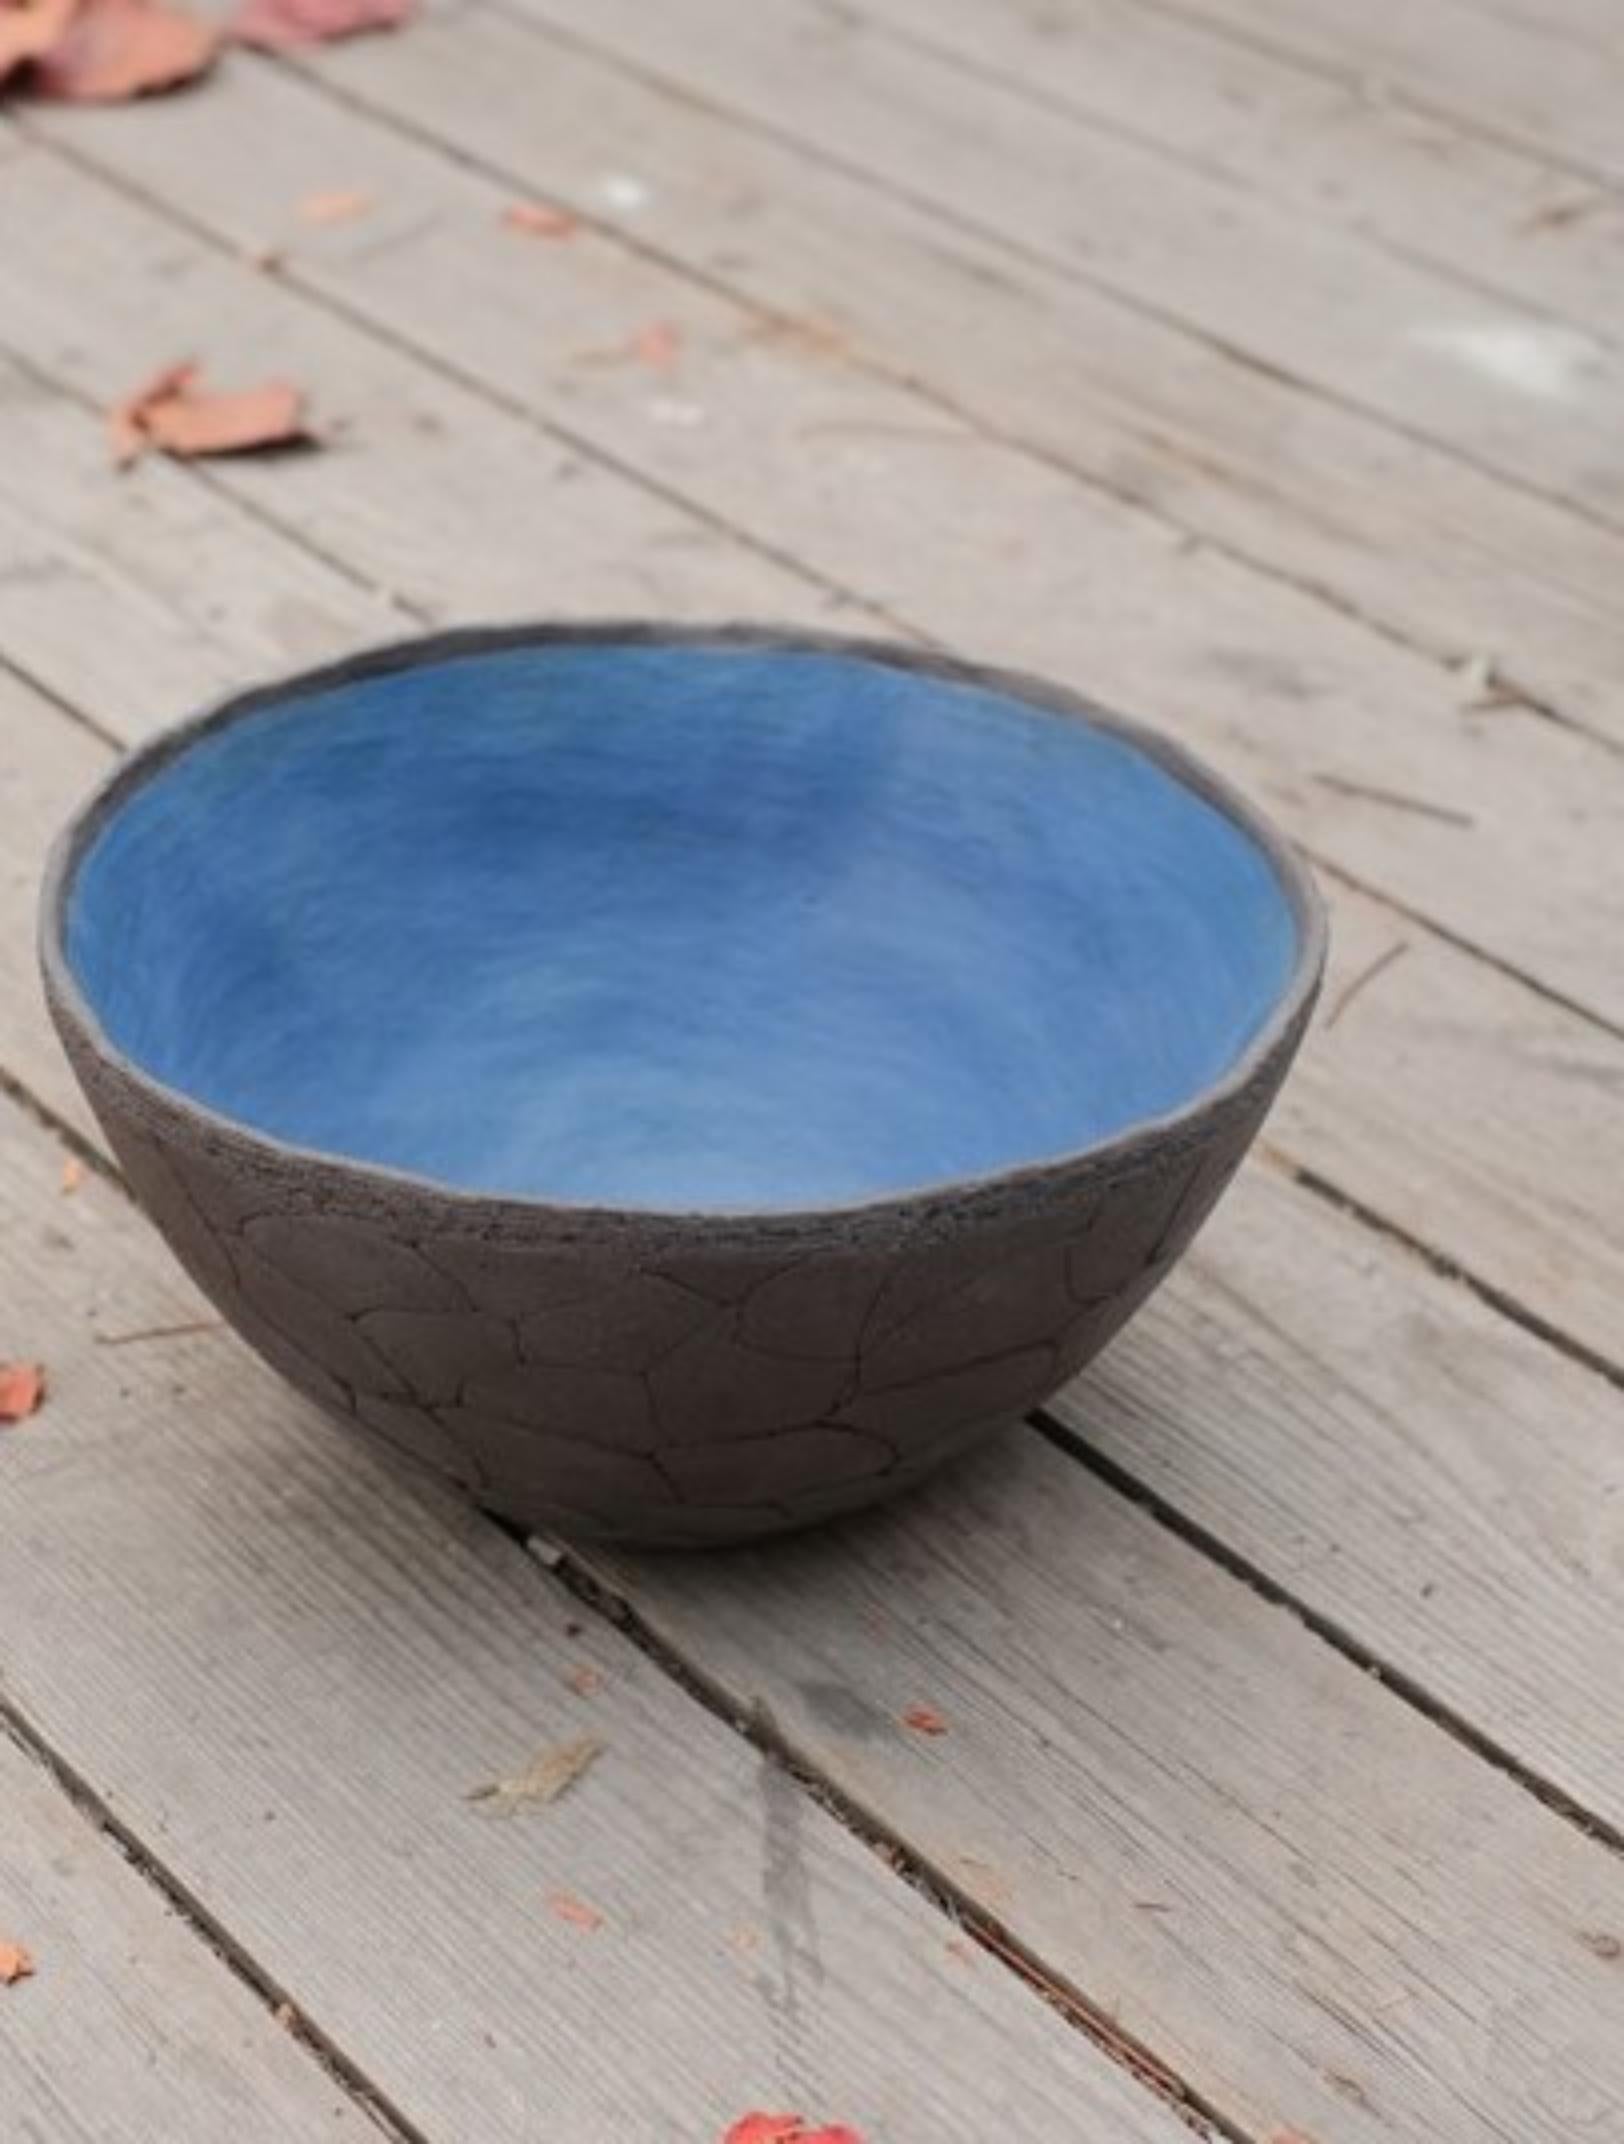 Small, low bowl by Atelier Ledure
Dimensions: D 27 x H 13 cm
Materials: Ceramics - stoneware
Also Available: Other variations available.

A Protest Against Polished Stoneware
The BOWLS are the result and expression of a series of experiments with